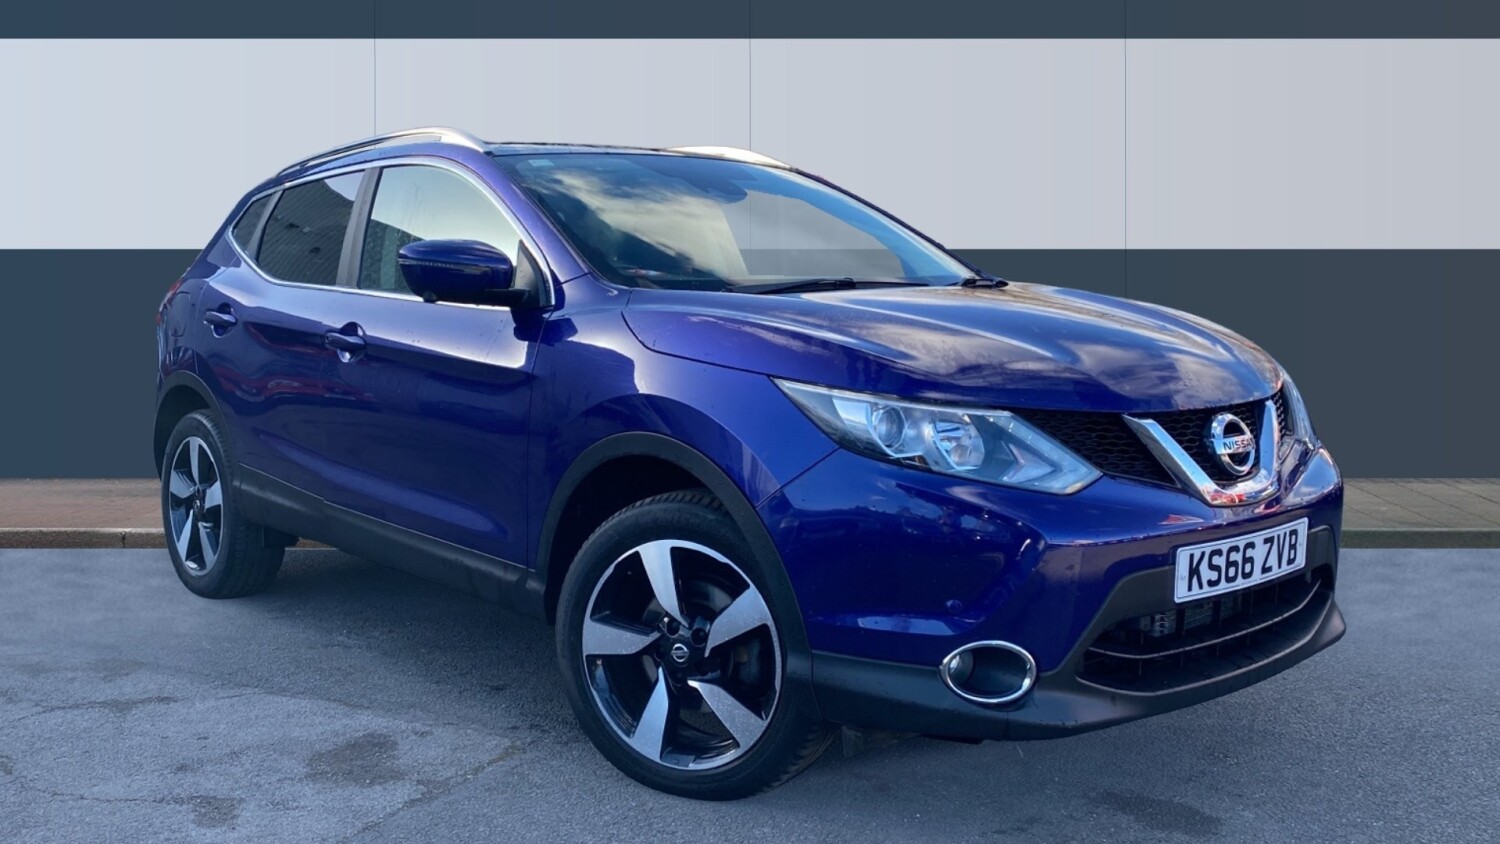 Used Nissan Qashqai 1 6 dCi N Connecta 5dr Xtronic Diesel Hatchback for 